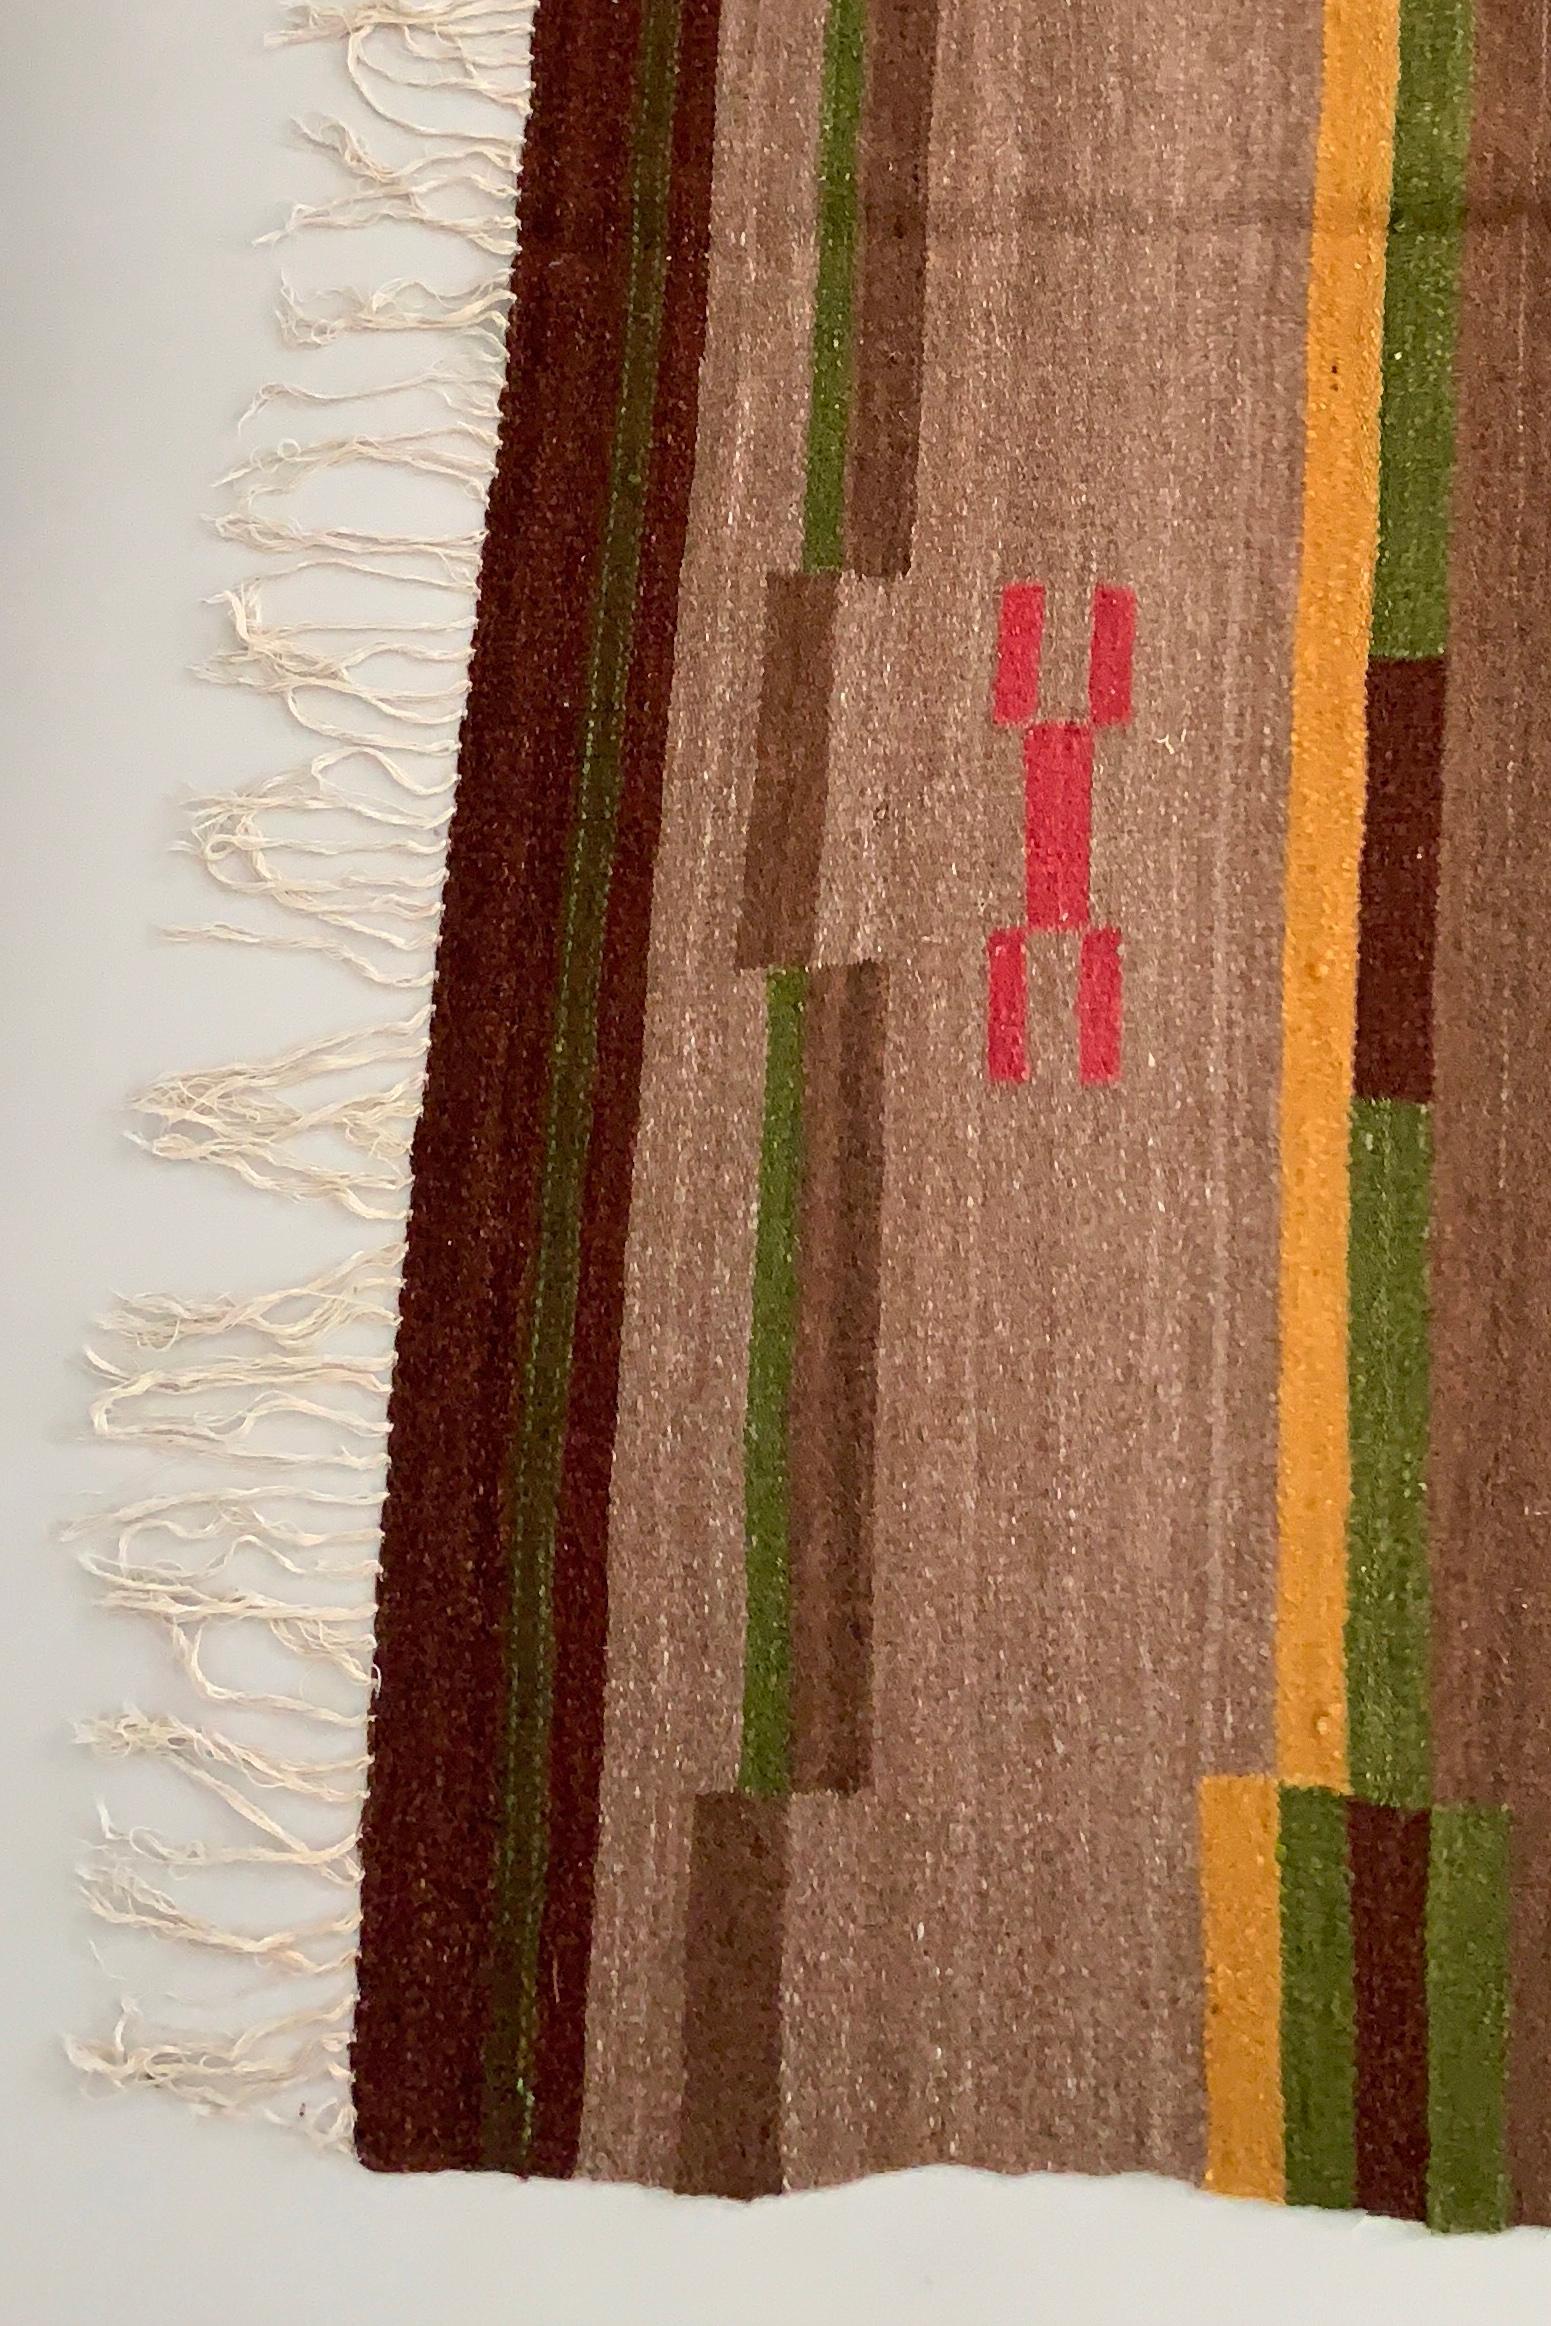 A handwoven functionalist rug.
Made in Finland circa 1930s.

310cm long by 220cm wide.